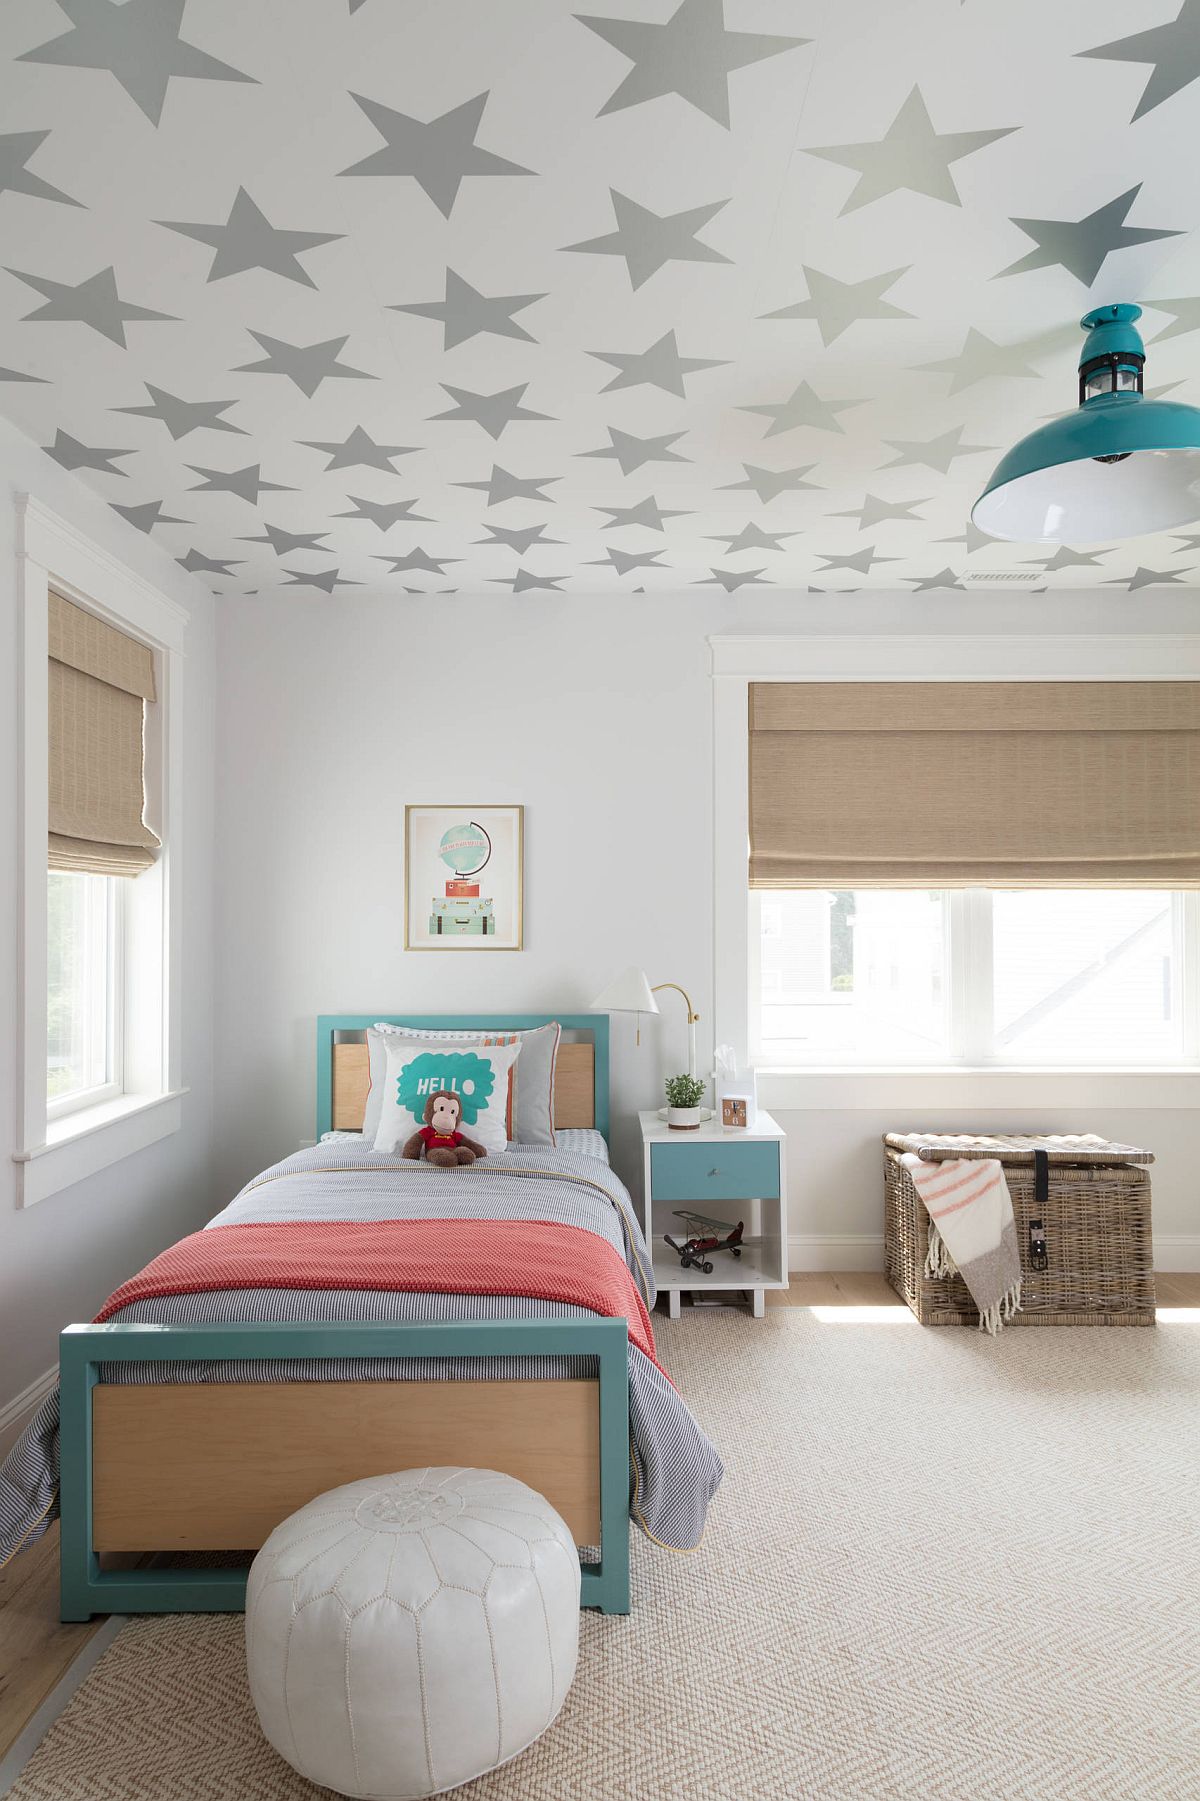 Wallpaper on ceiling 10 Cute Ways to Use Removable Wallpaper for Your Kid’s Bedroom - 2